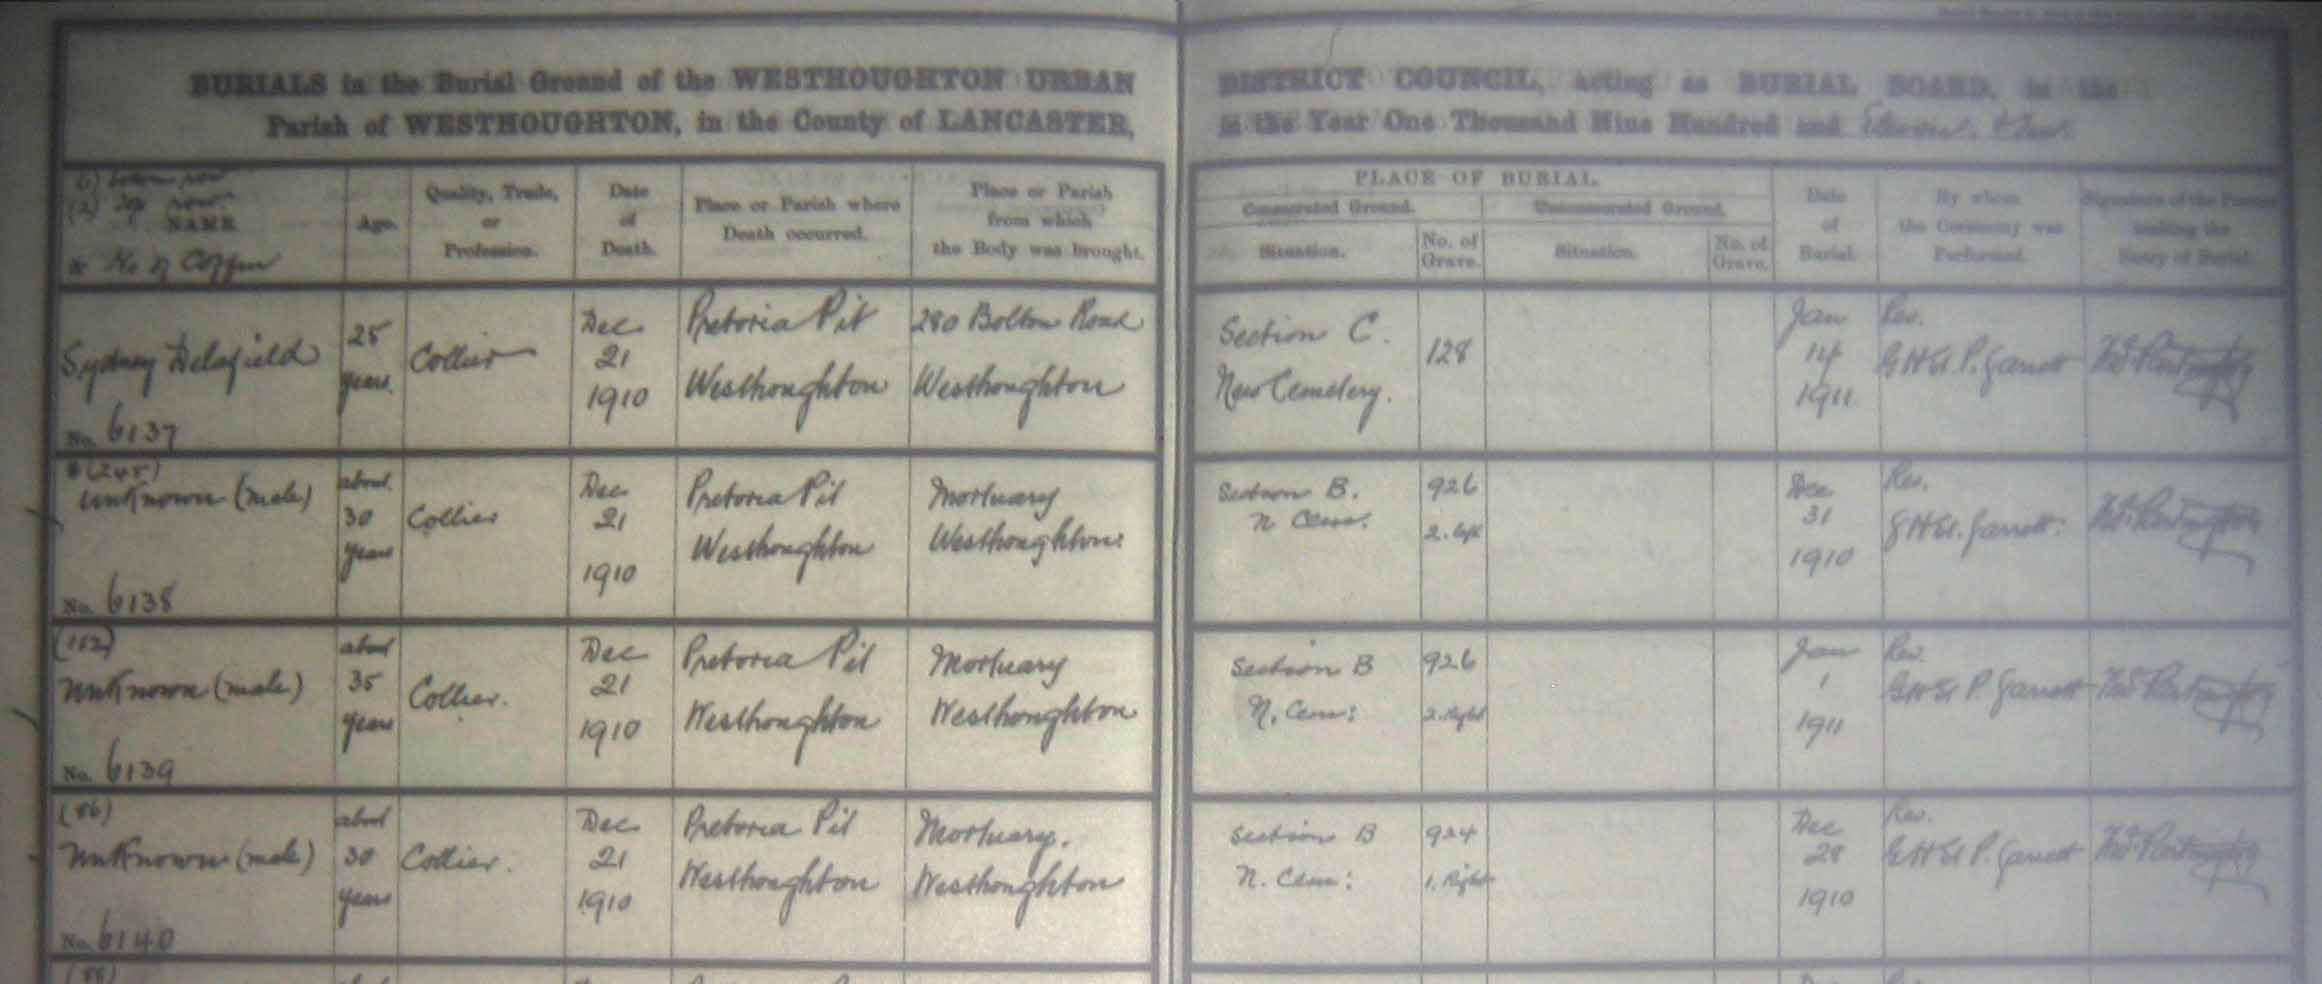 Entries in Westhoughton Cemetery burial register. Sydney Delafield was body No.333 recovered on 12  Jan 1911. After him, the register records the earlier burials of unidentified bodies